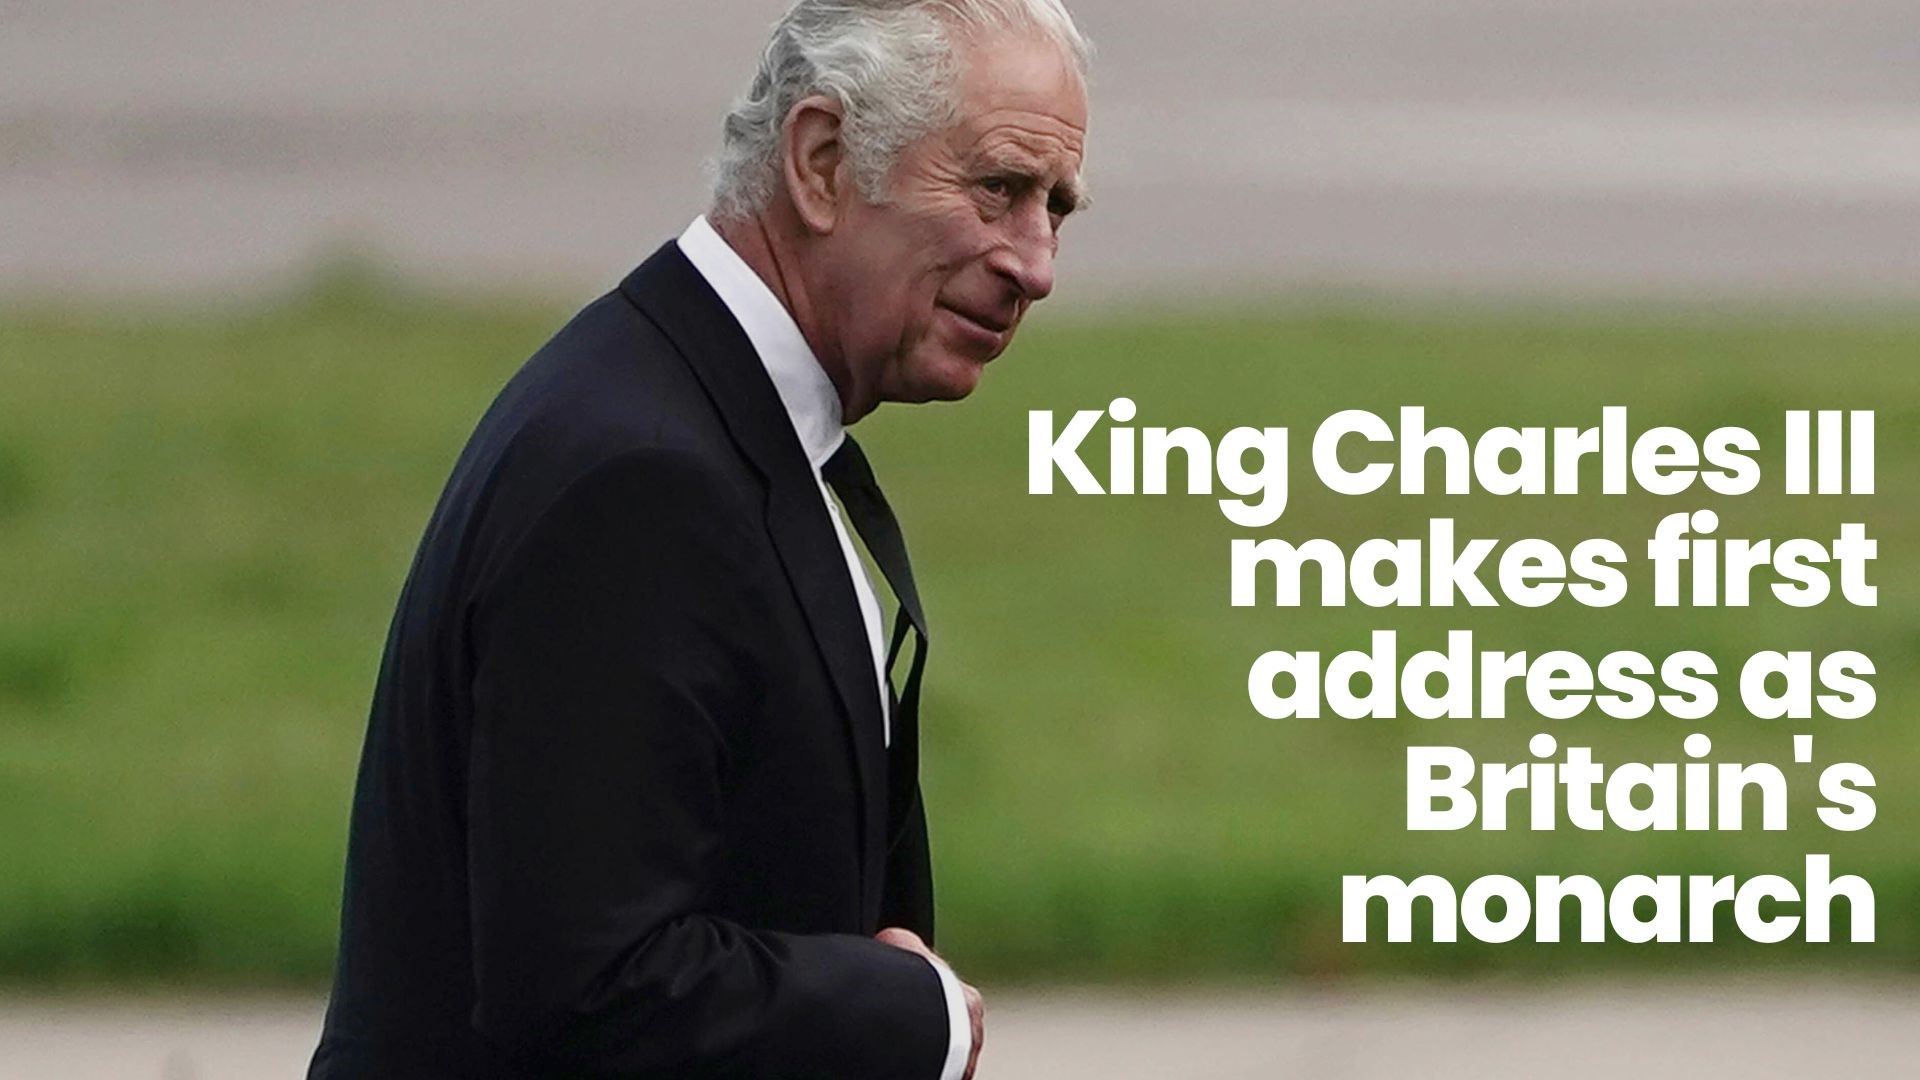 King Charles III makes first speech as Britain's new monarch. He vows to continue the Queen's lifelong service to the country.